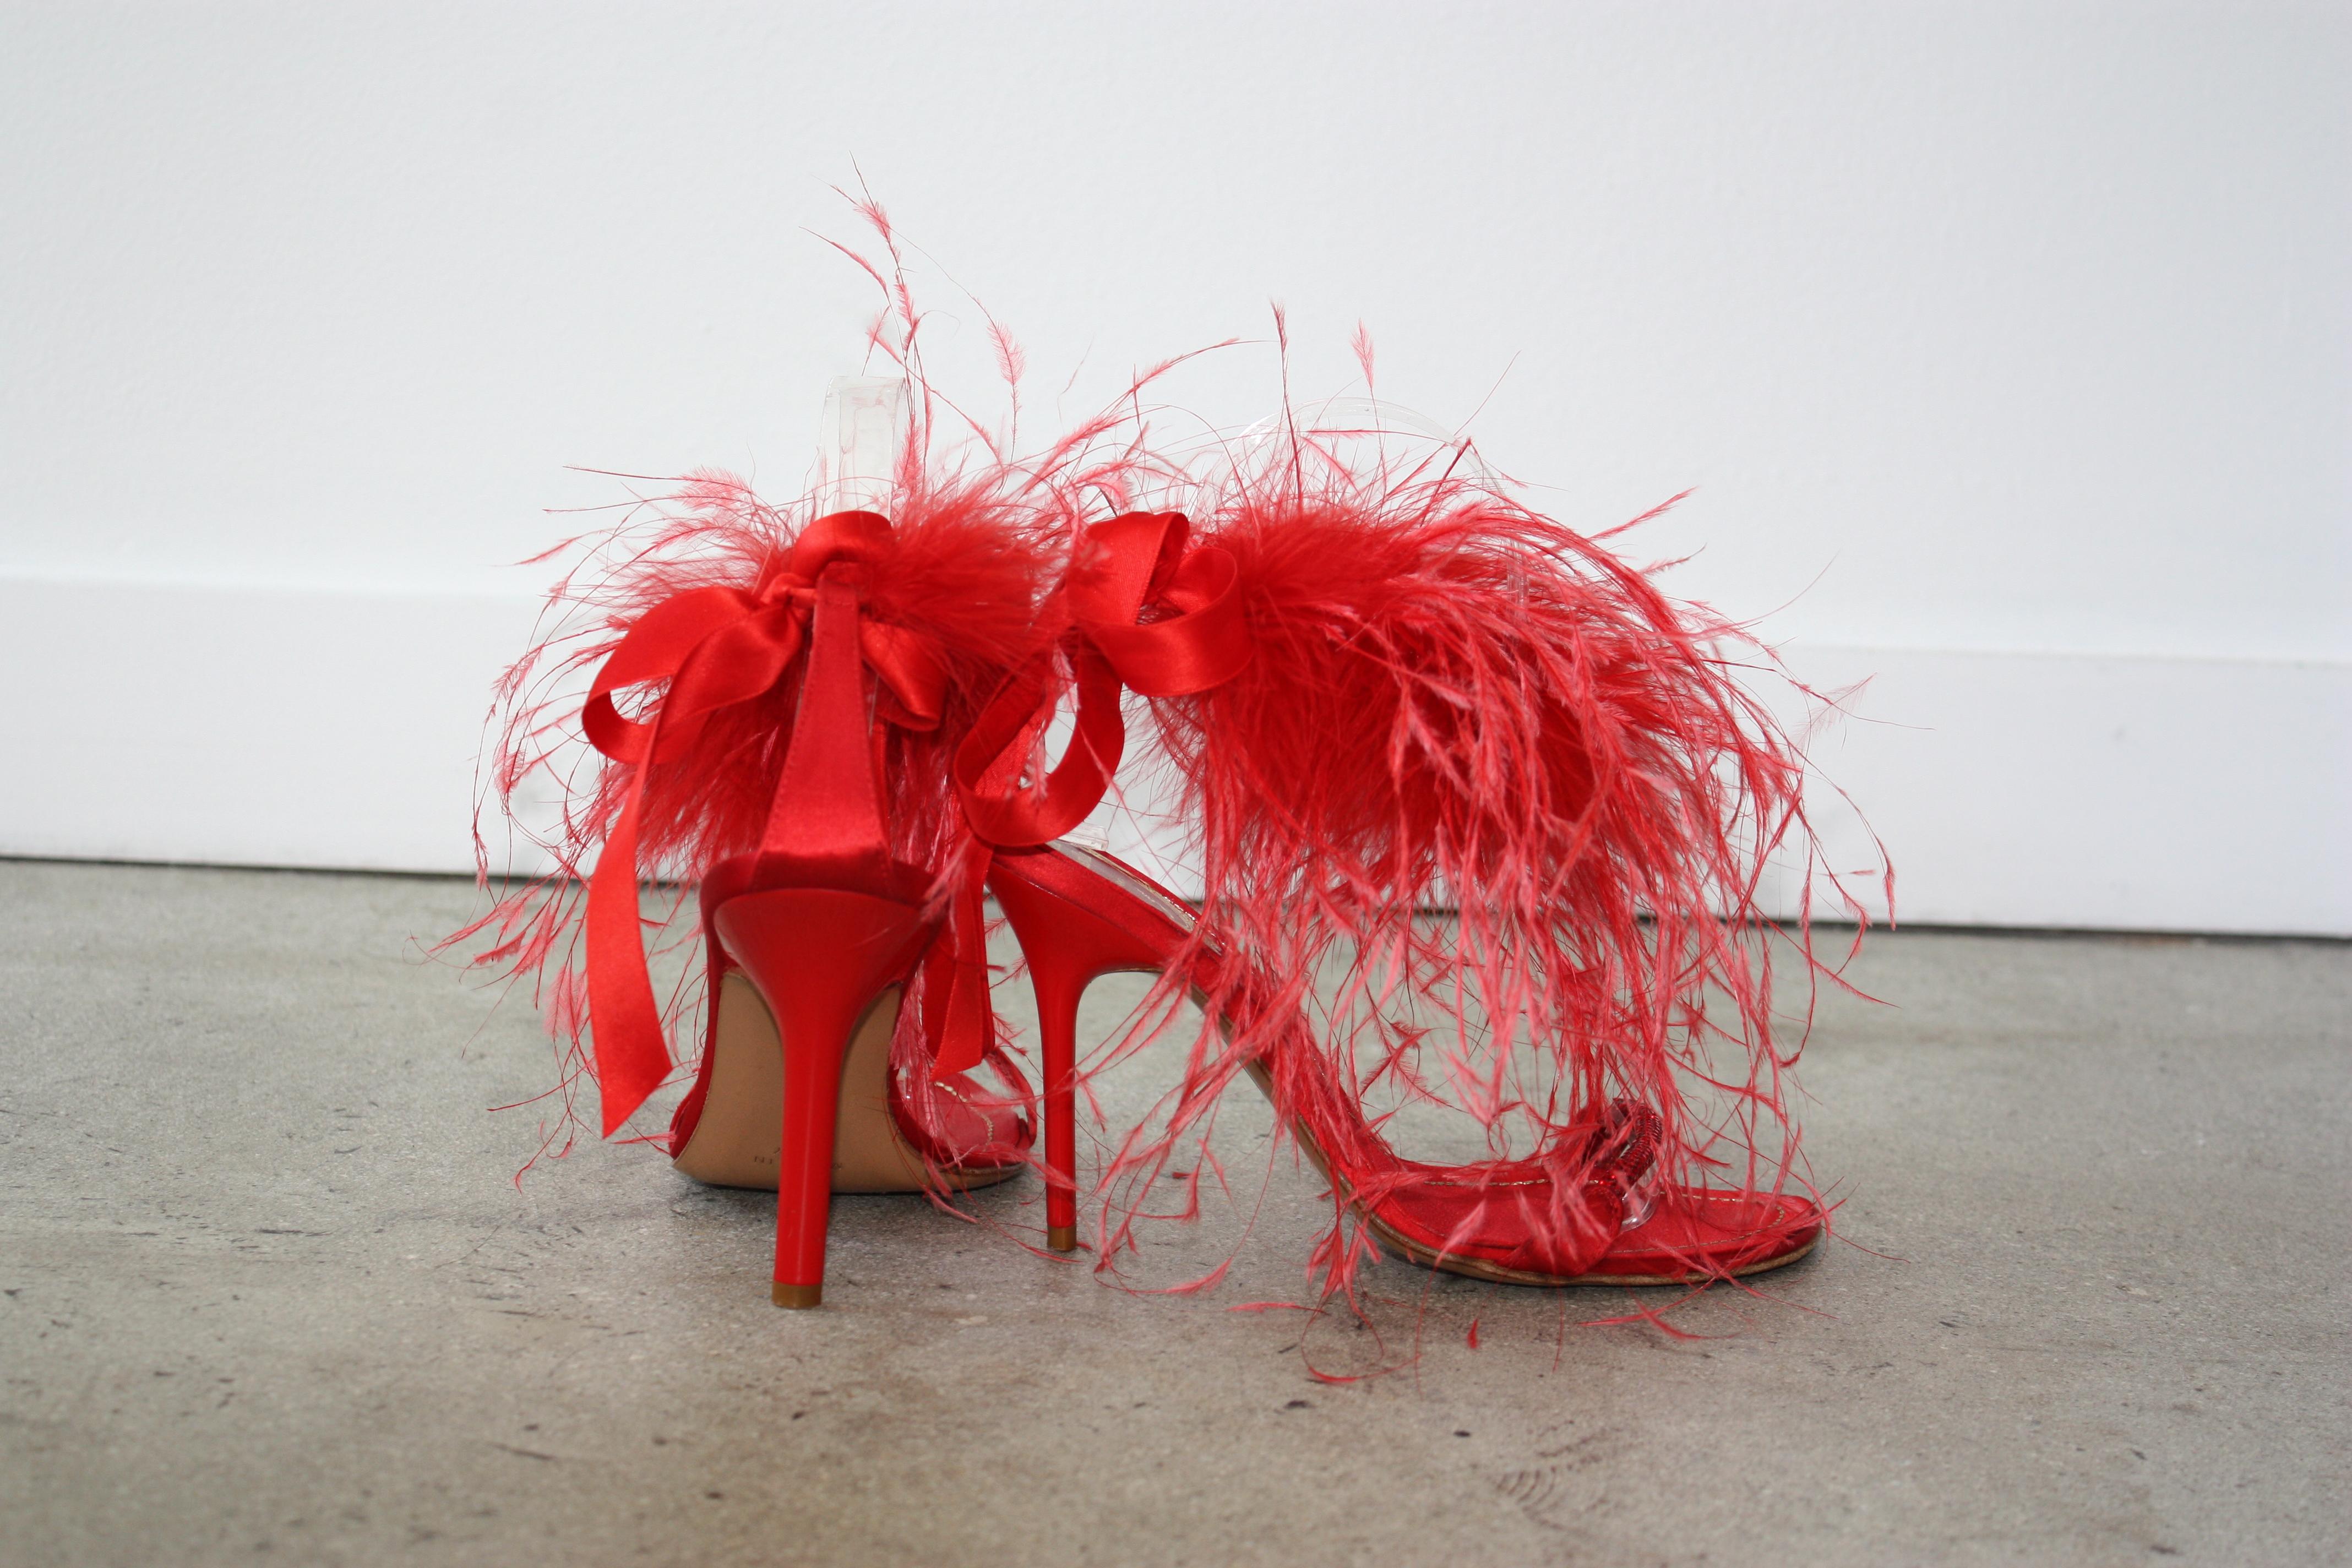 Rene Caovilla RED Satin and Feather Heels Size 37.5 Tonal rhinestone toe strap with feathers surrounding the ankle. Red satin ribbon back ankle tie.
Minor wear to soles. SUPER GLAM !! Perfect for Holidays !!
Size 37 1/2 
Priced to sell quickly ! 